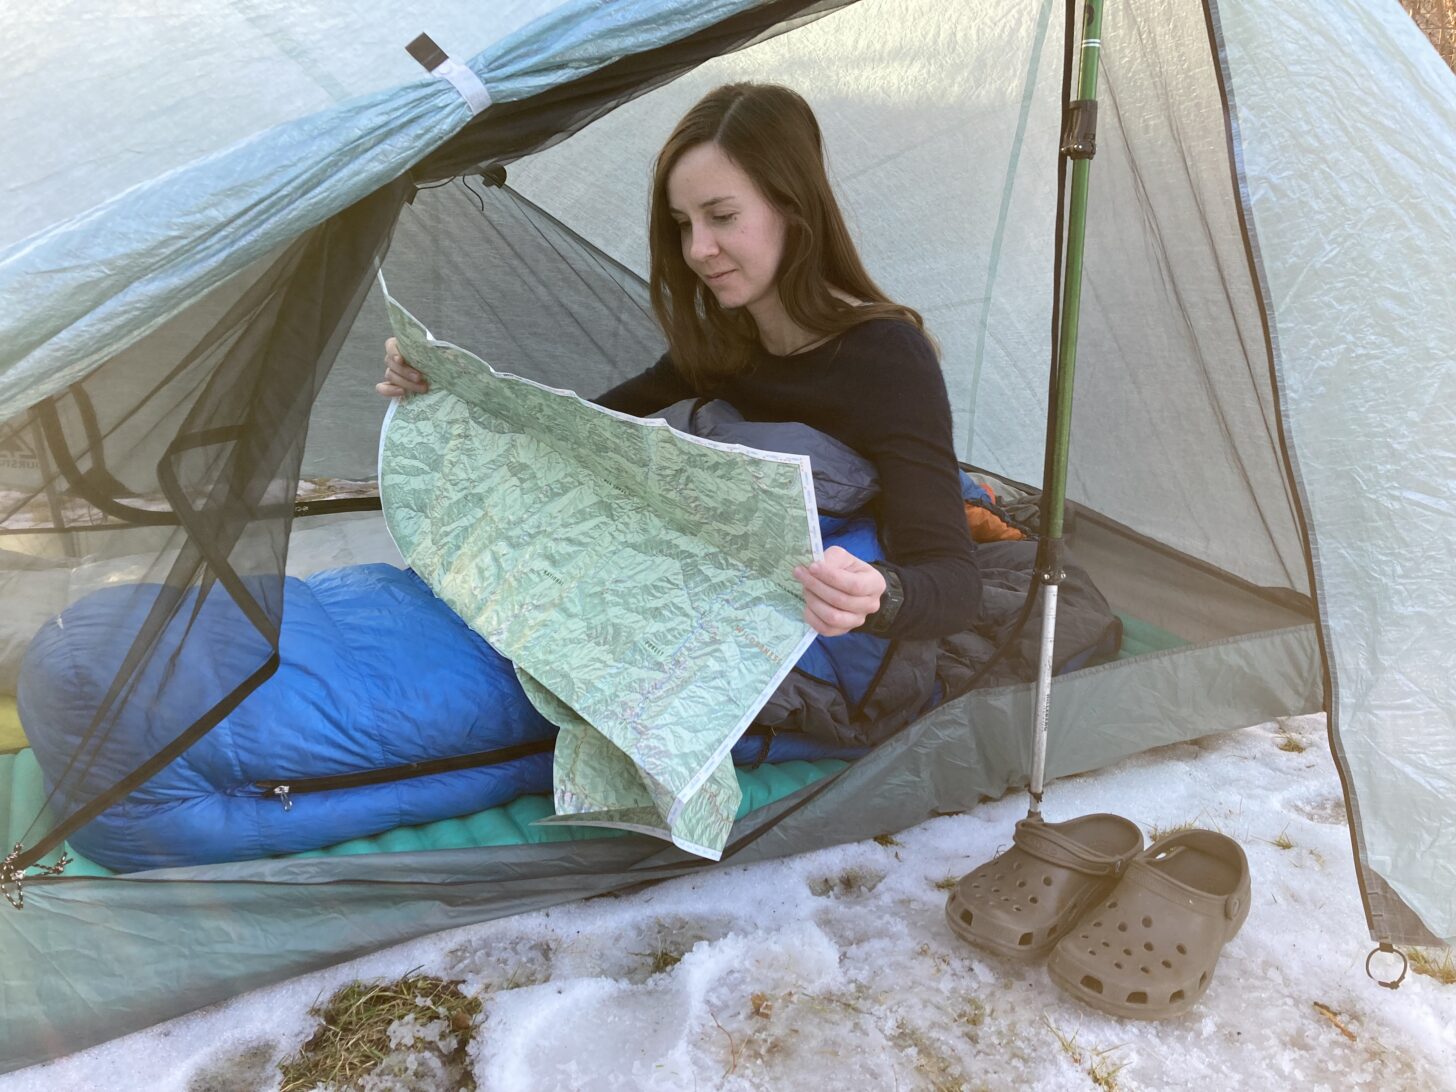 A woman reads a map inside a tent.